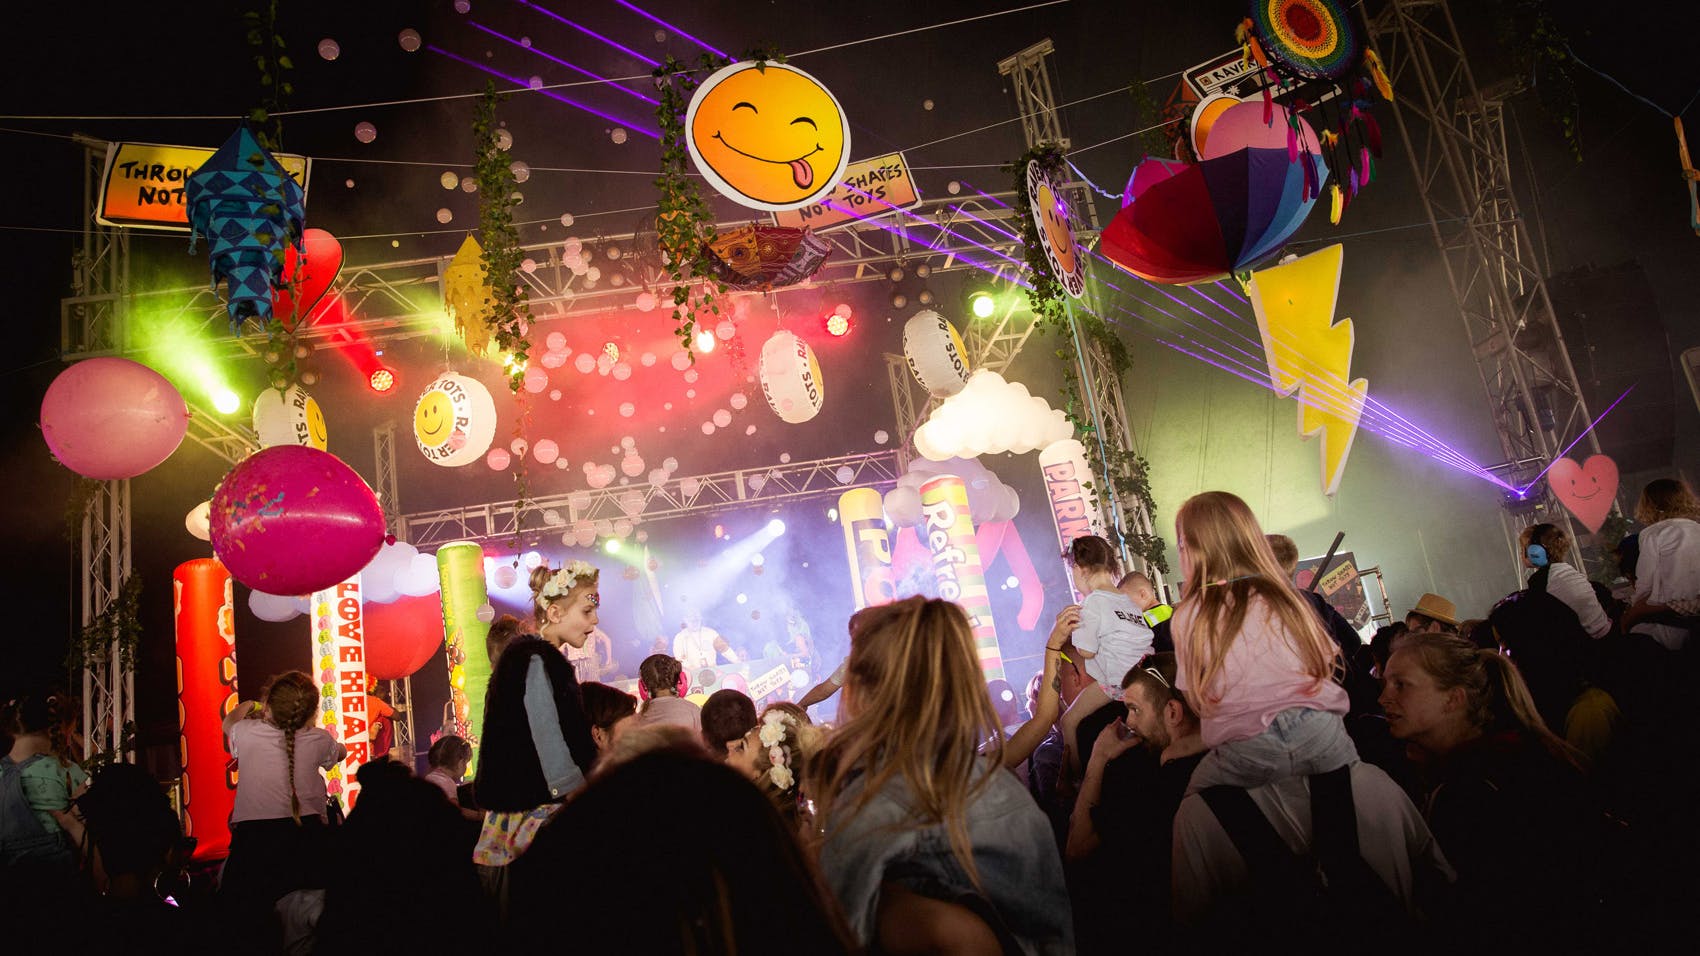 Raver Tots Returns with a summer of fun filled festivals around the UK.